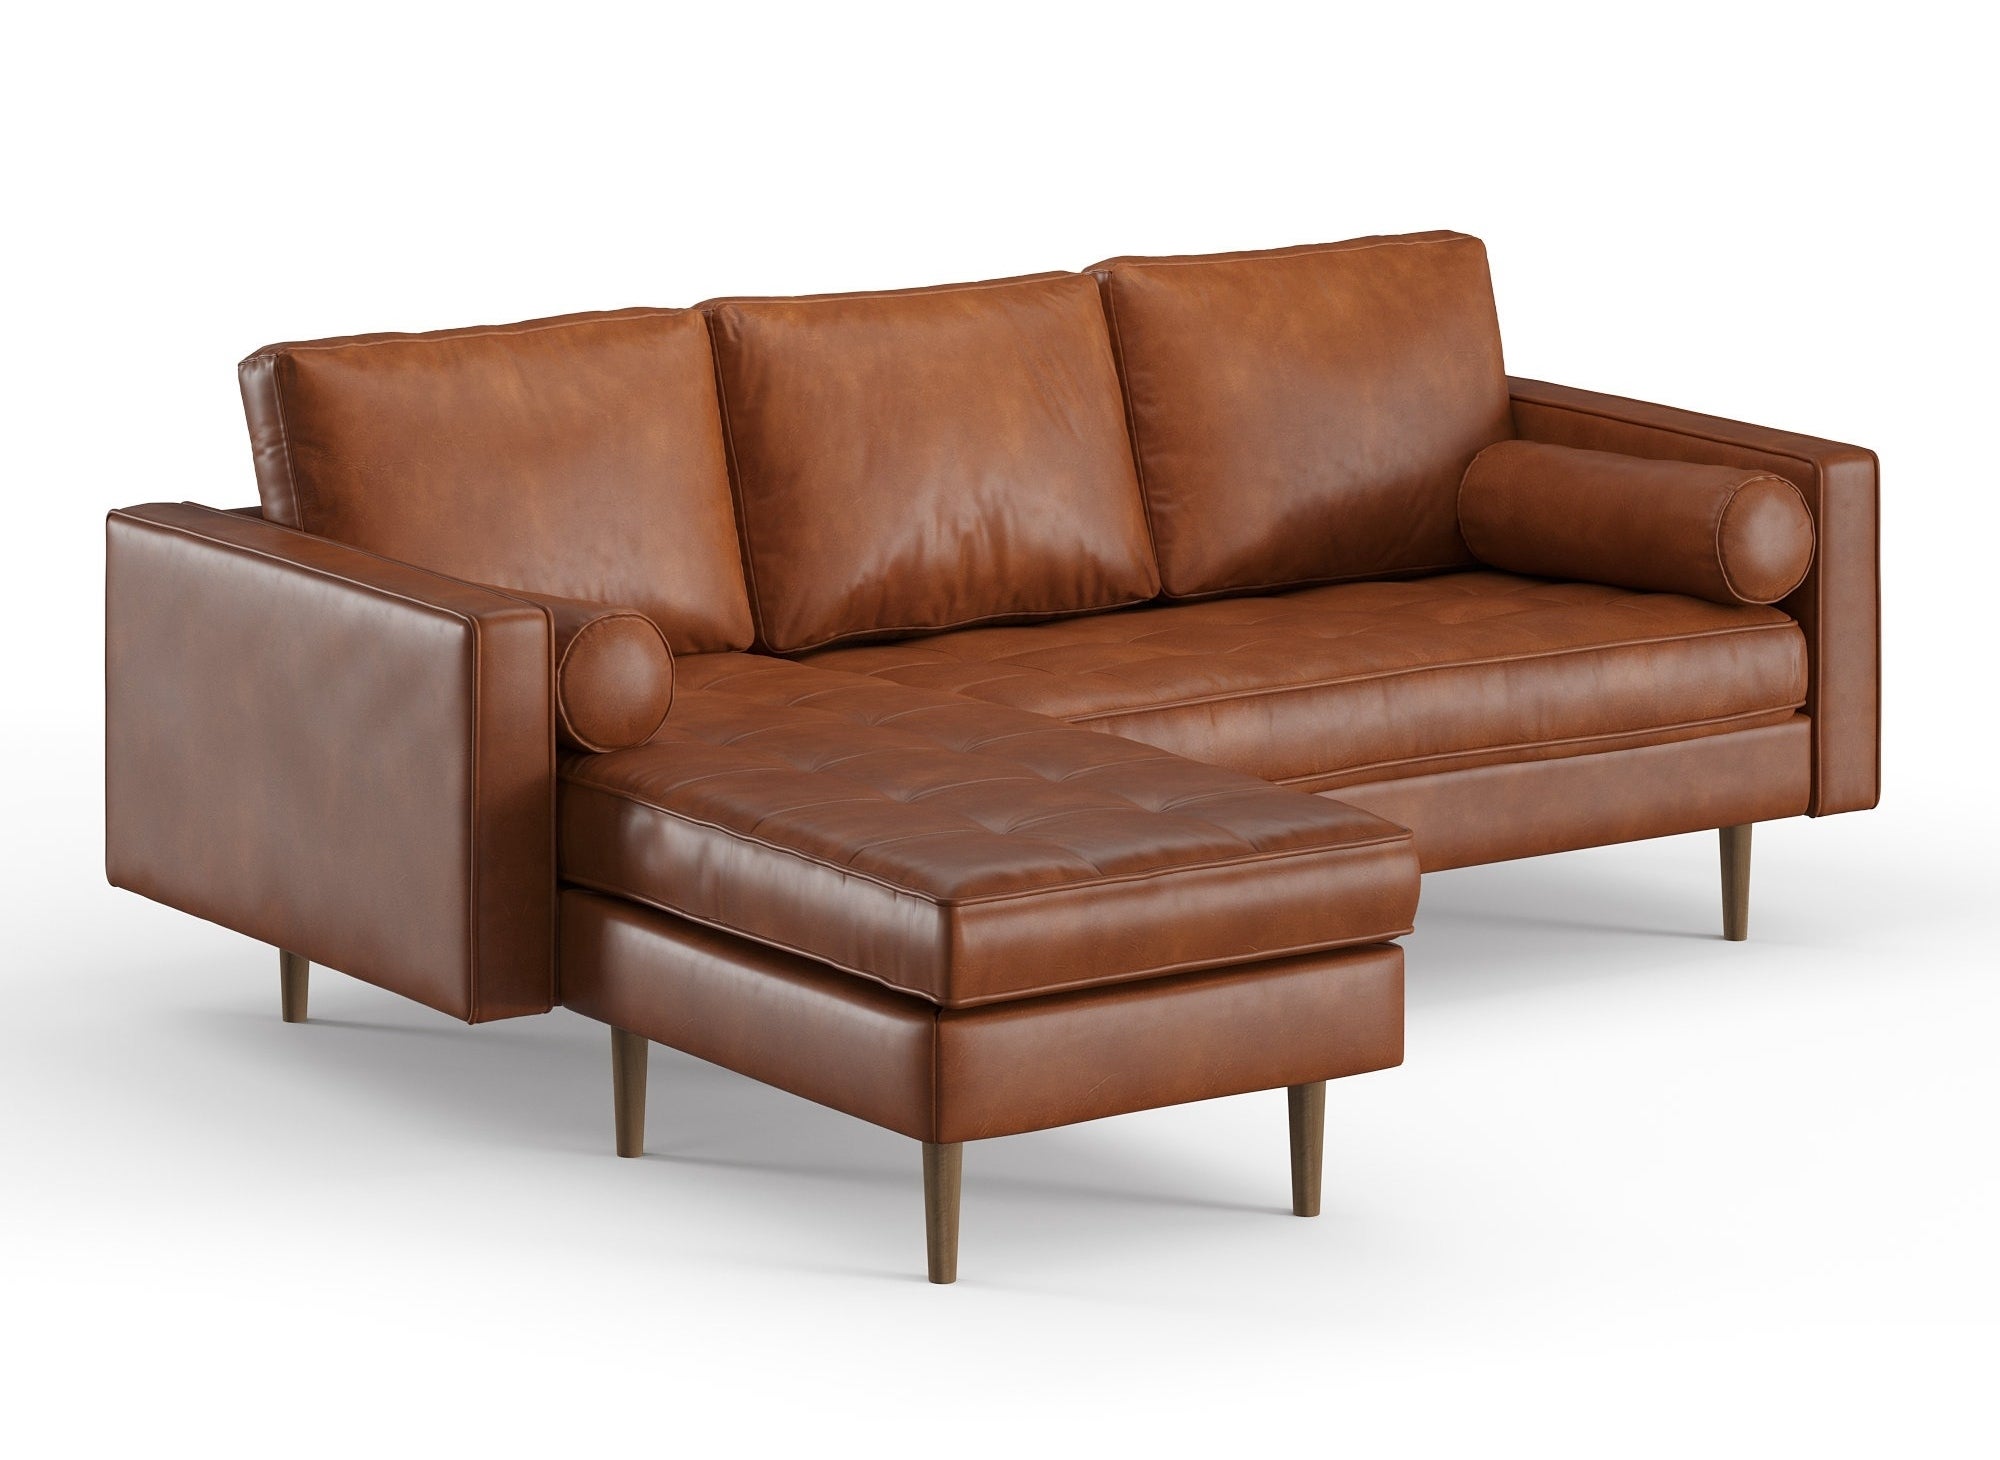 A brown faux leather sectional